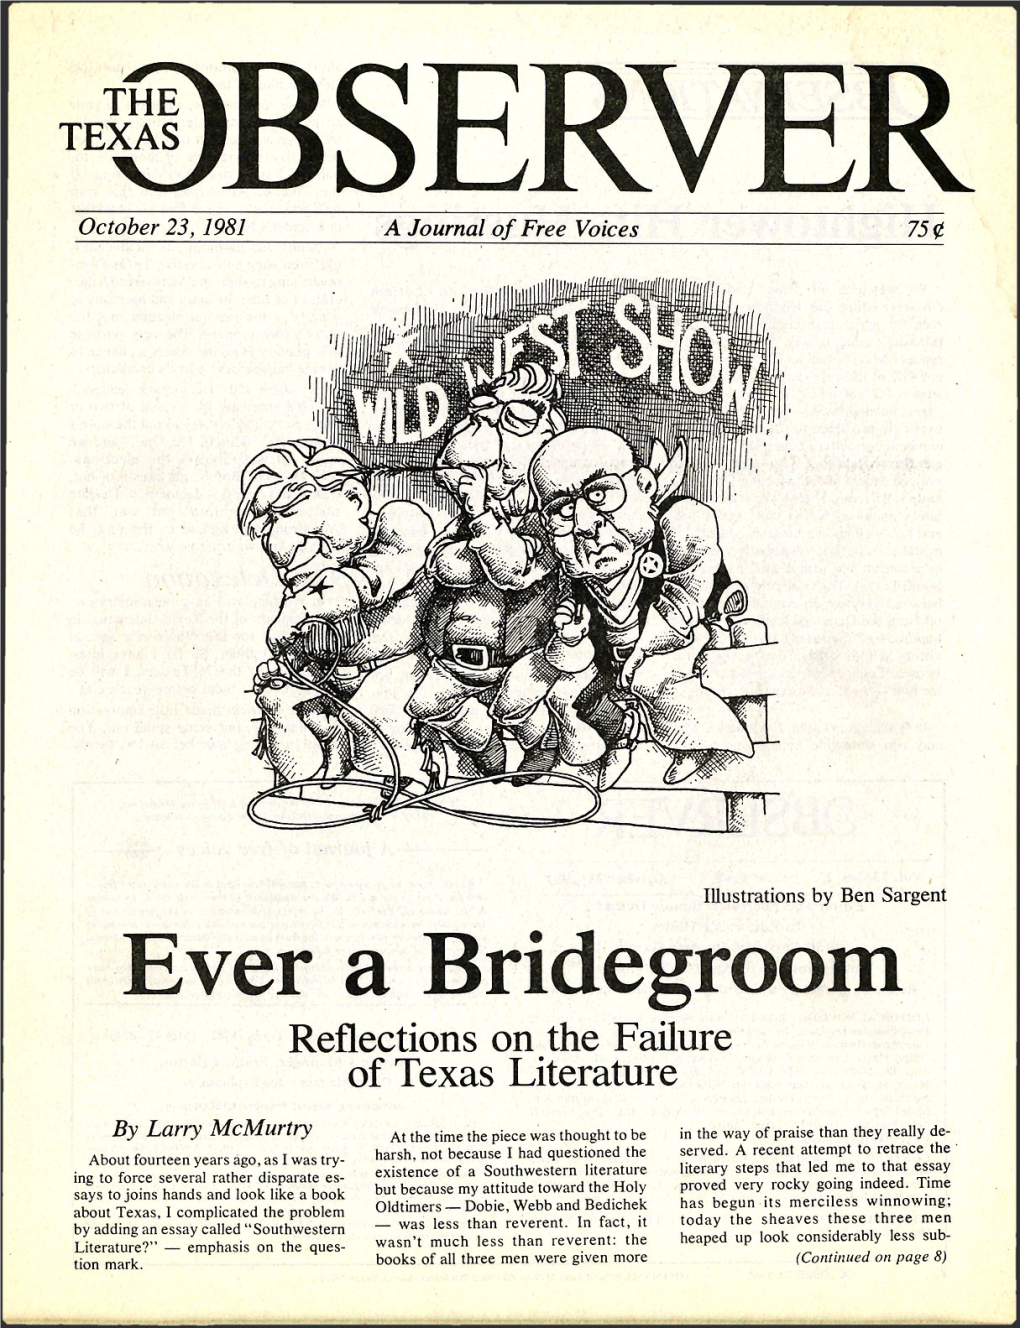 Ever a Bridegroom Reflections on the Failure of Texas Literature